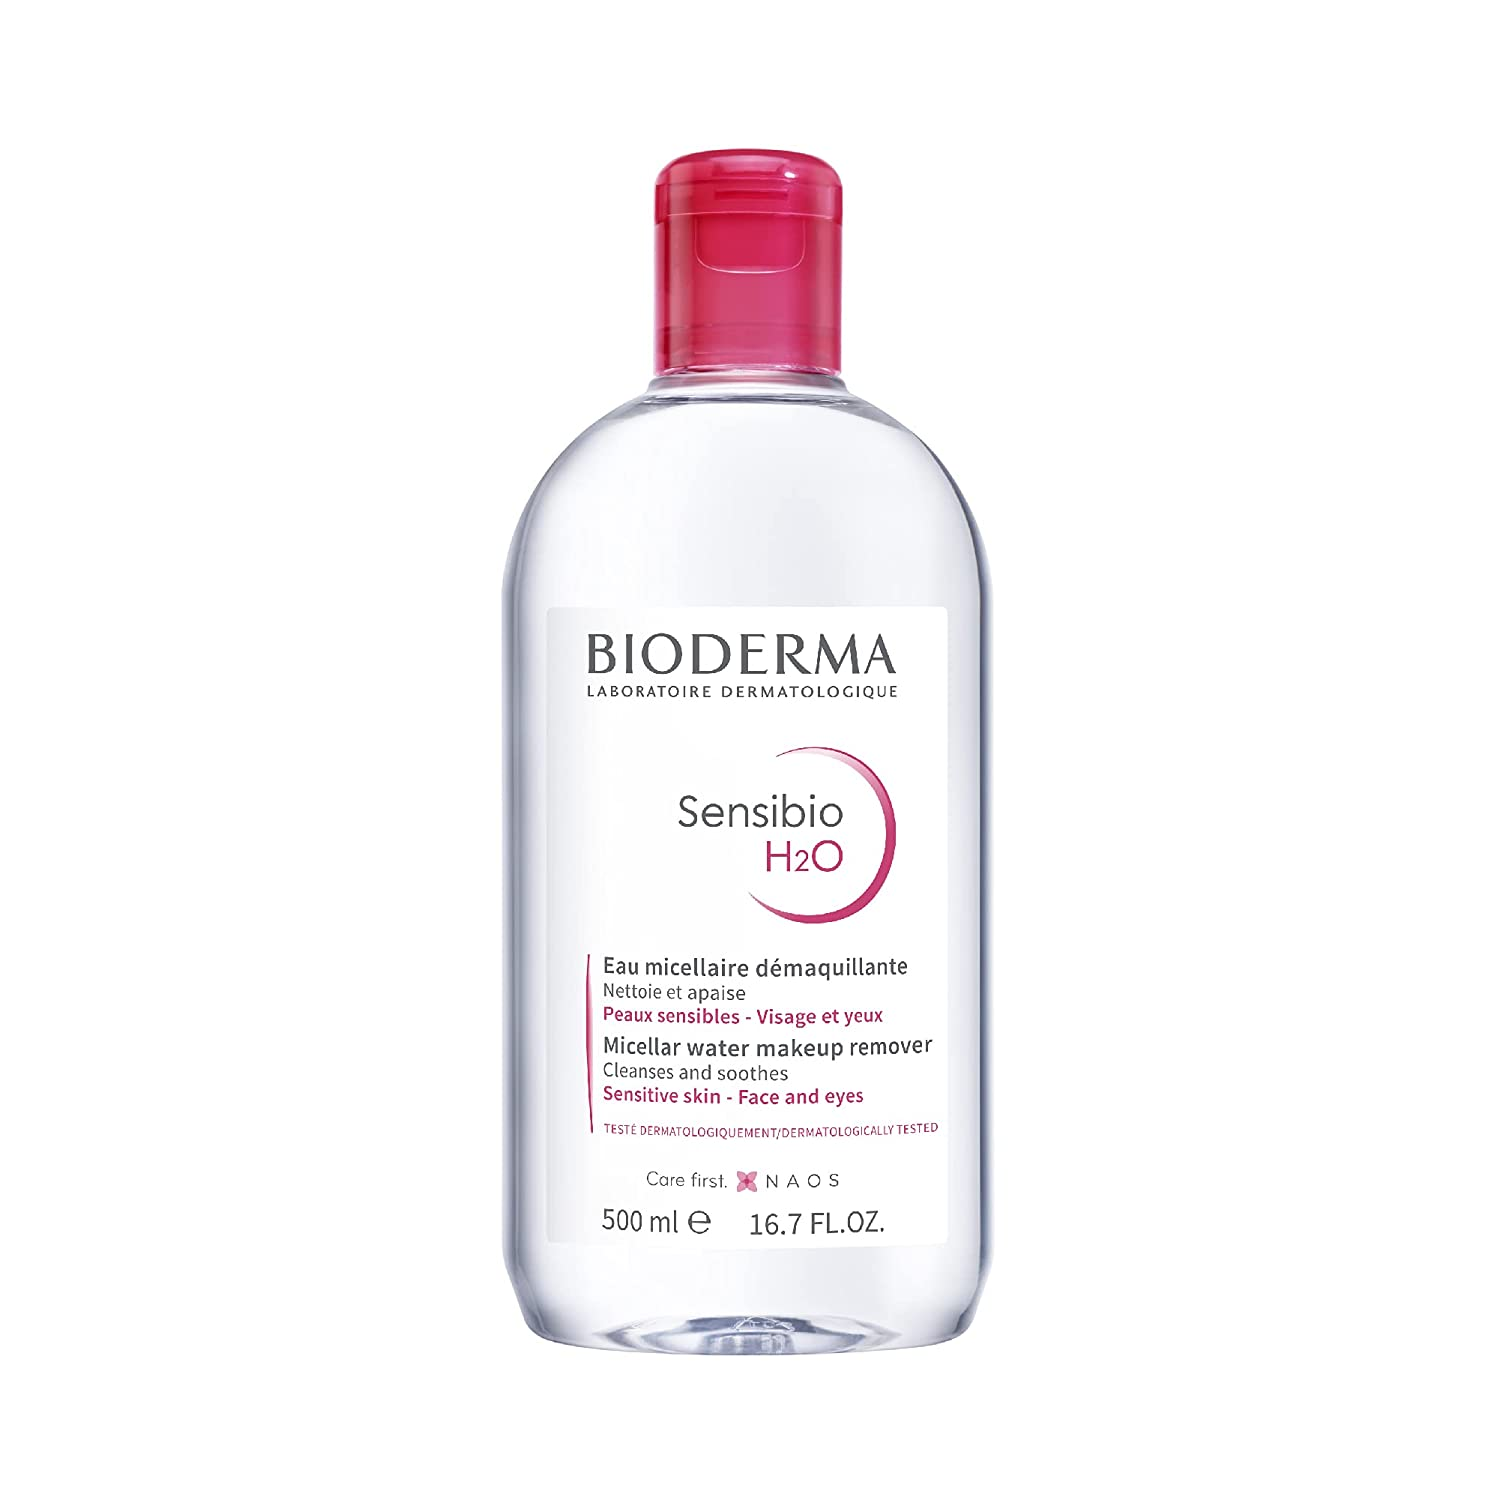 Bioderma - Sensibio - H2O Micellar Water - Makeup Remover Cleanser cleansing and makeup removing micellar water that respects the fragility of sensitive skin